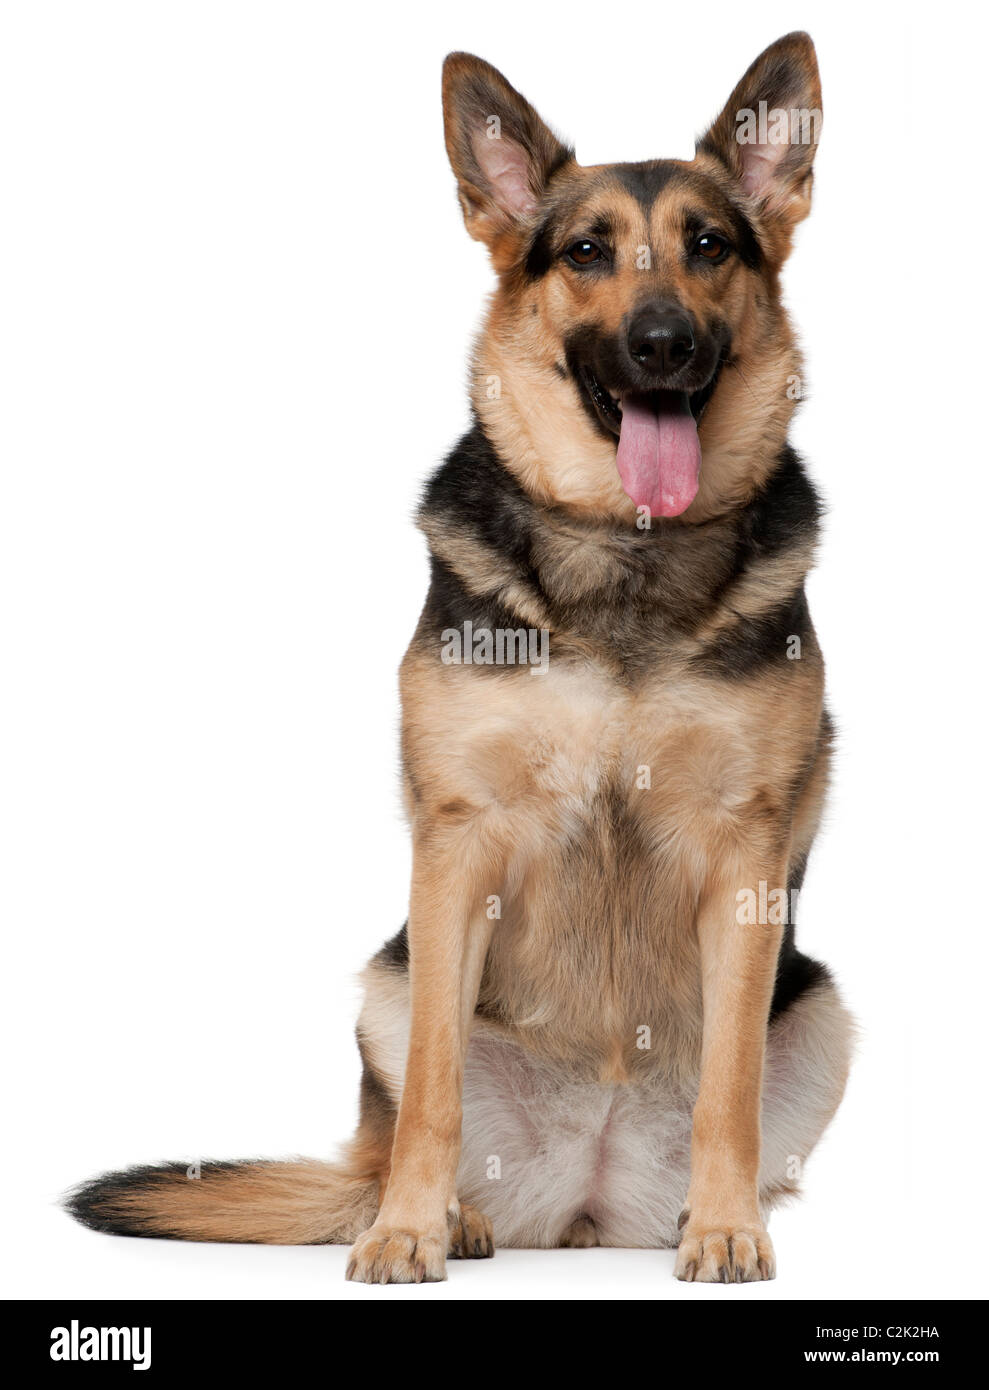 German Shepherd dog, 4 years old, sitting in front of white background Stock Photo